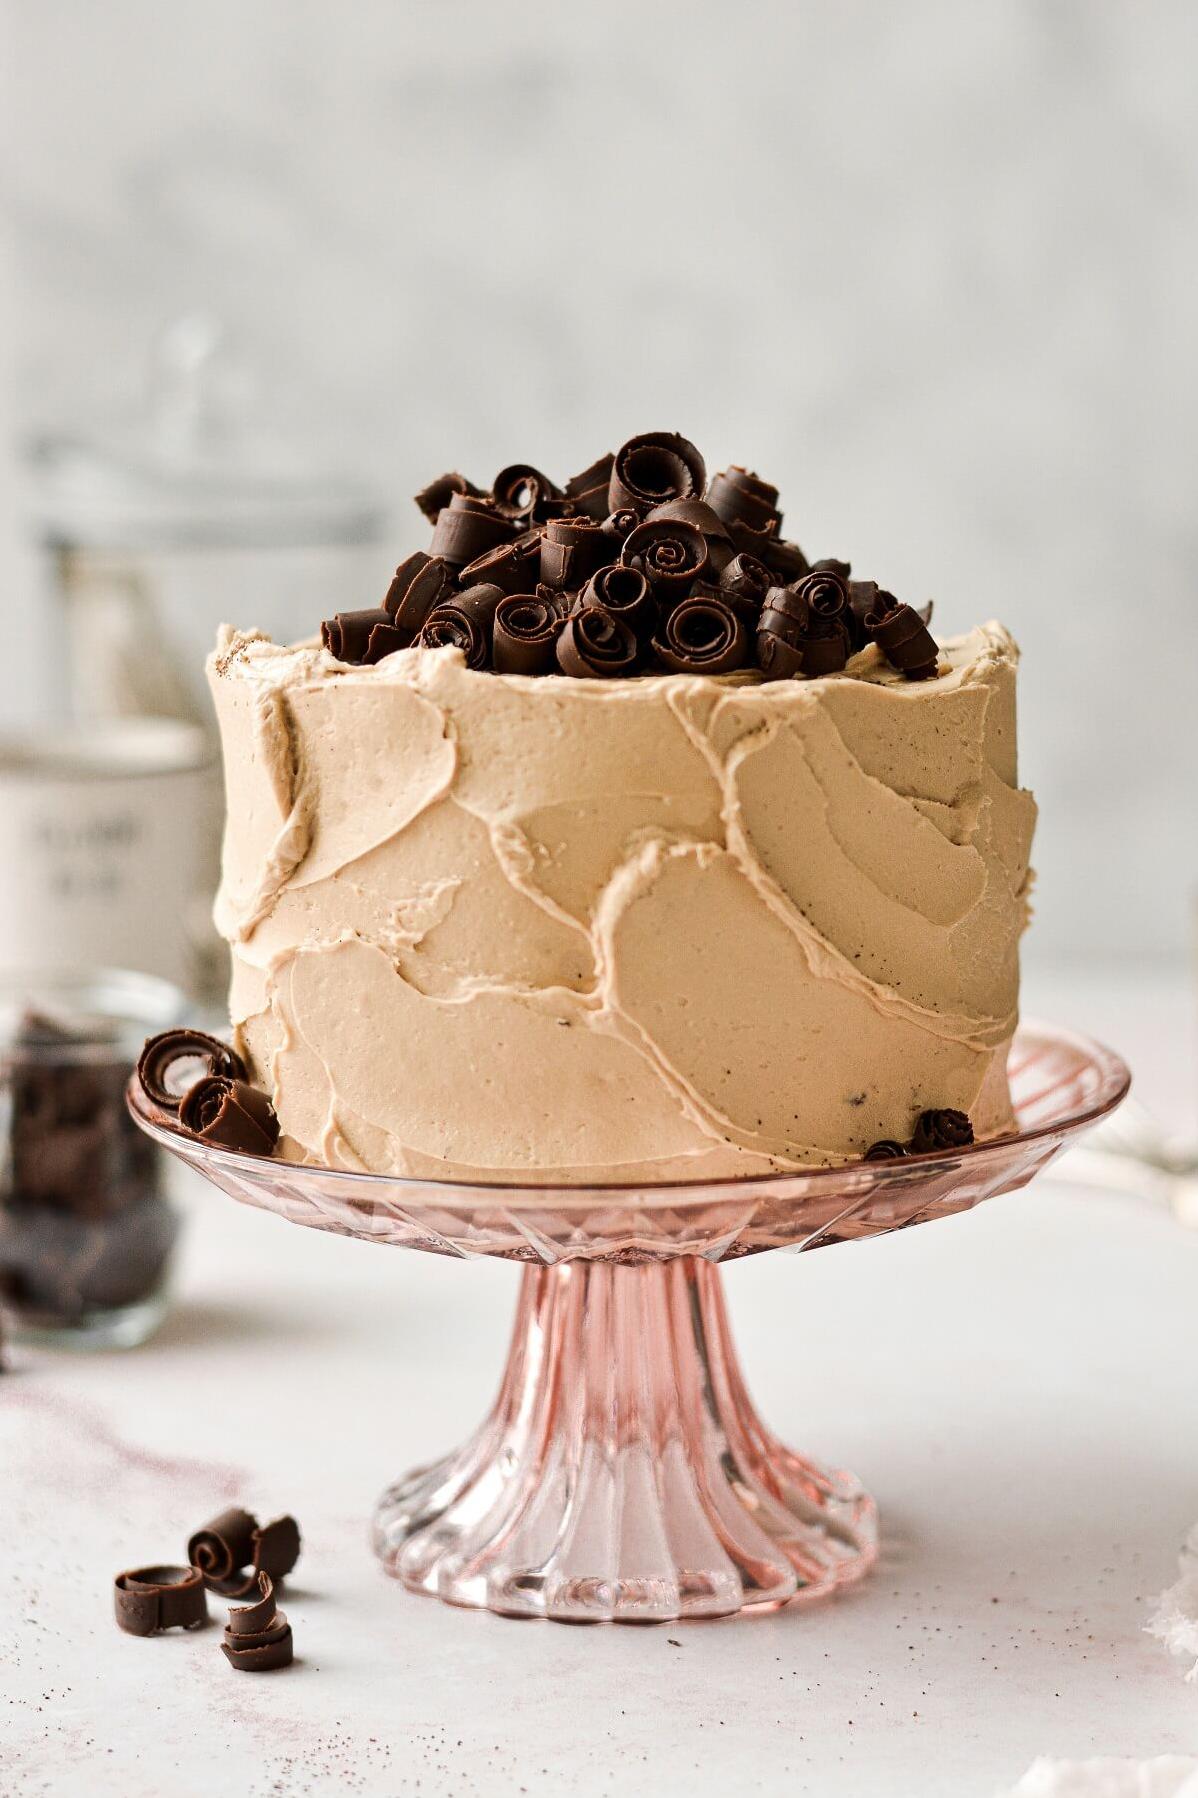  Perfect cake for the chocolate and coffee lover